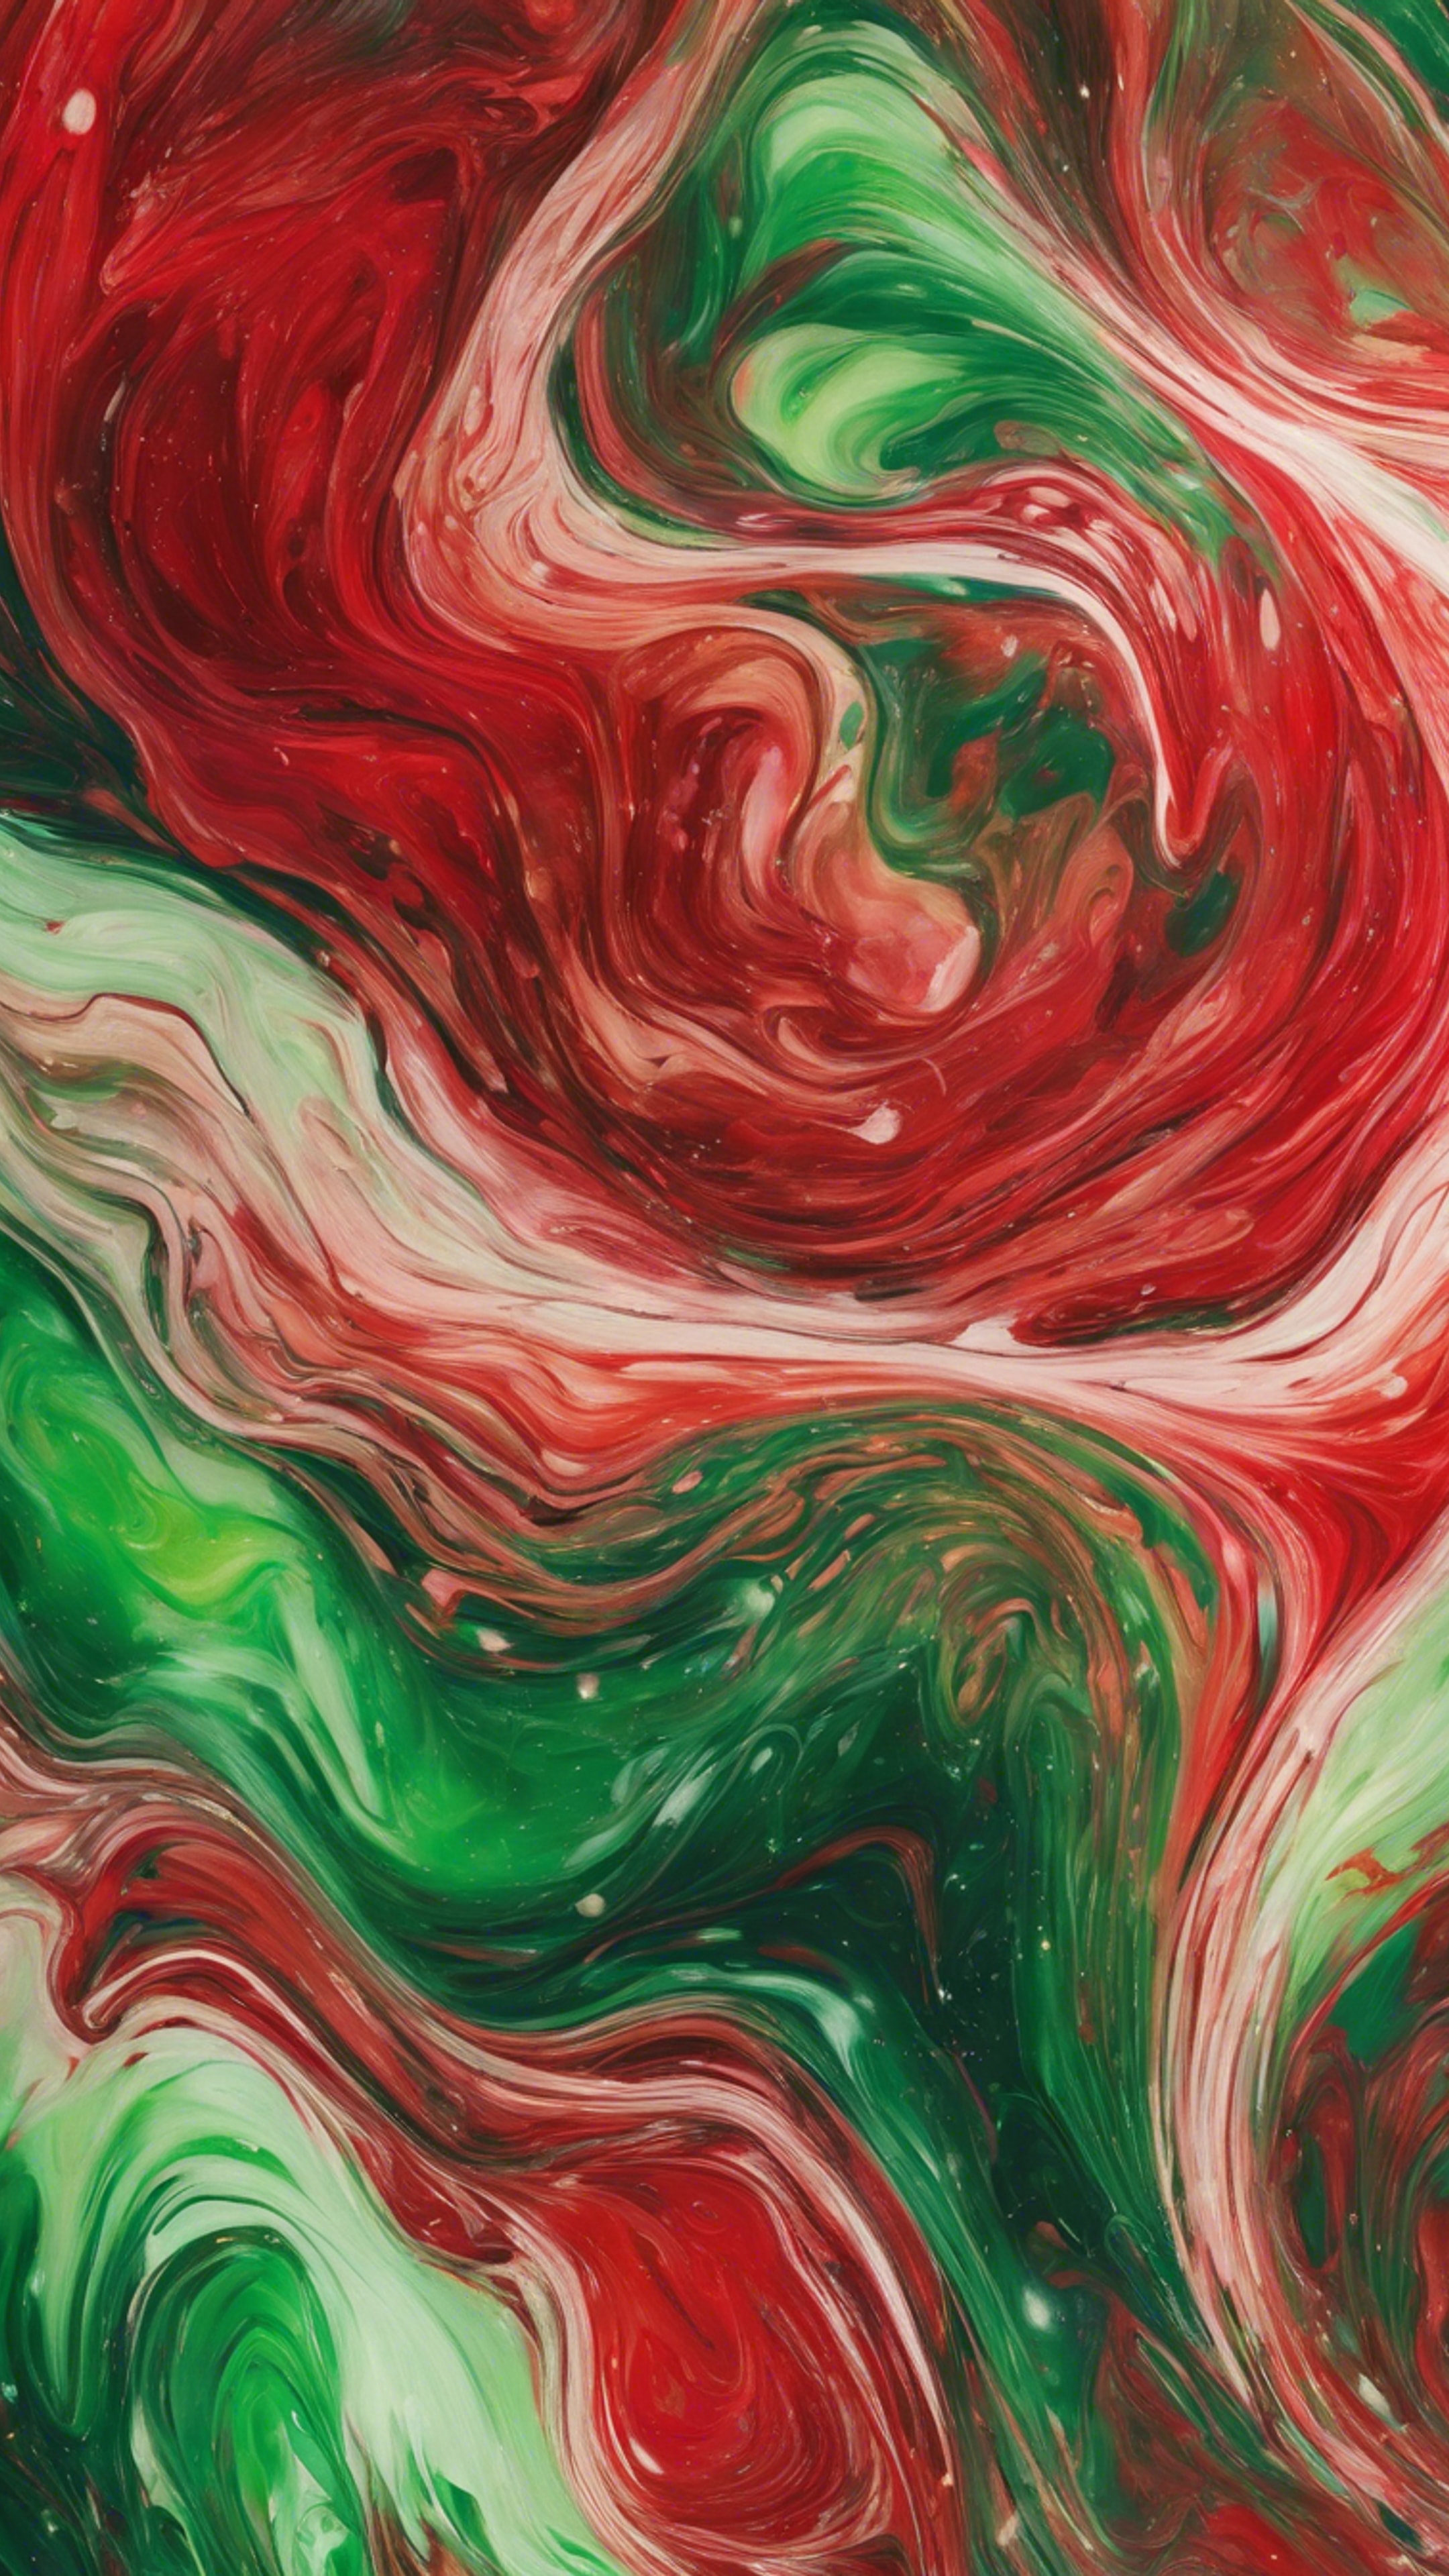 A vivid painting of swirling red and green abstract patterns duvar kağıdı[5978fc4bccef4bcc8a58]